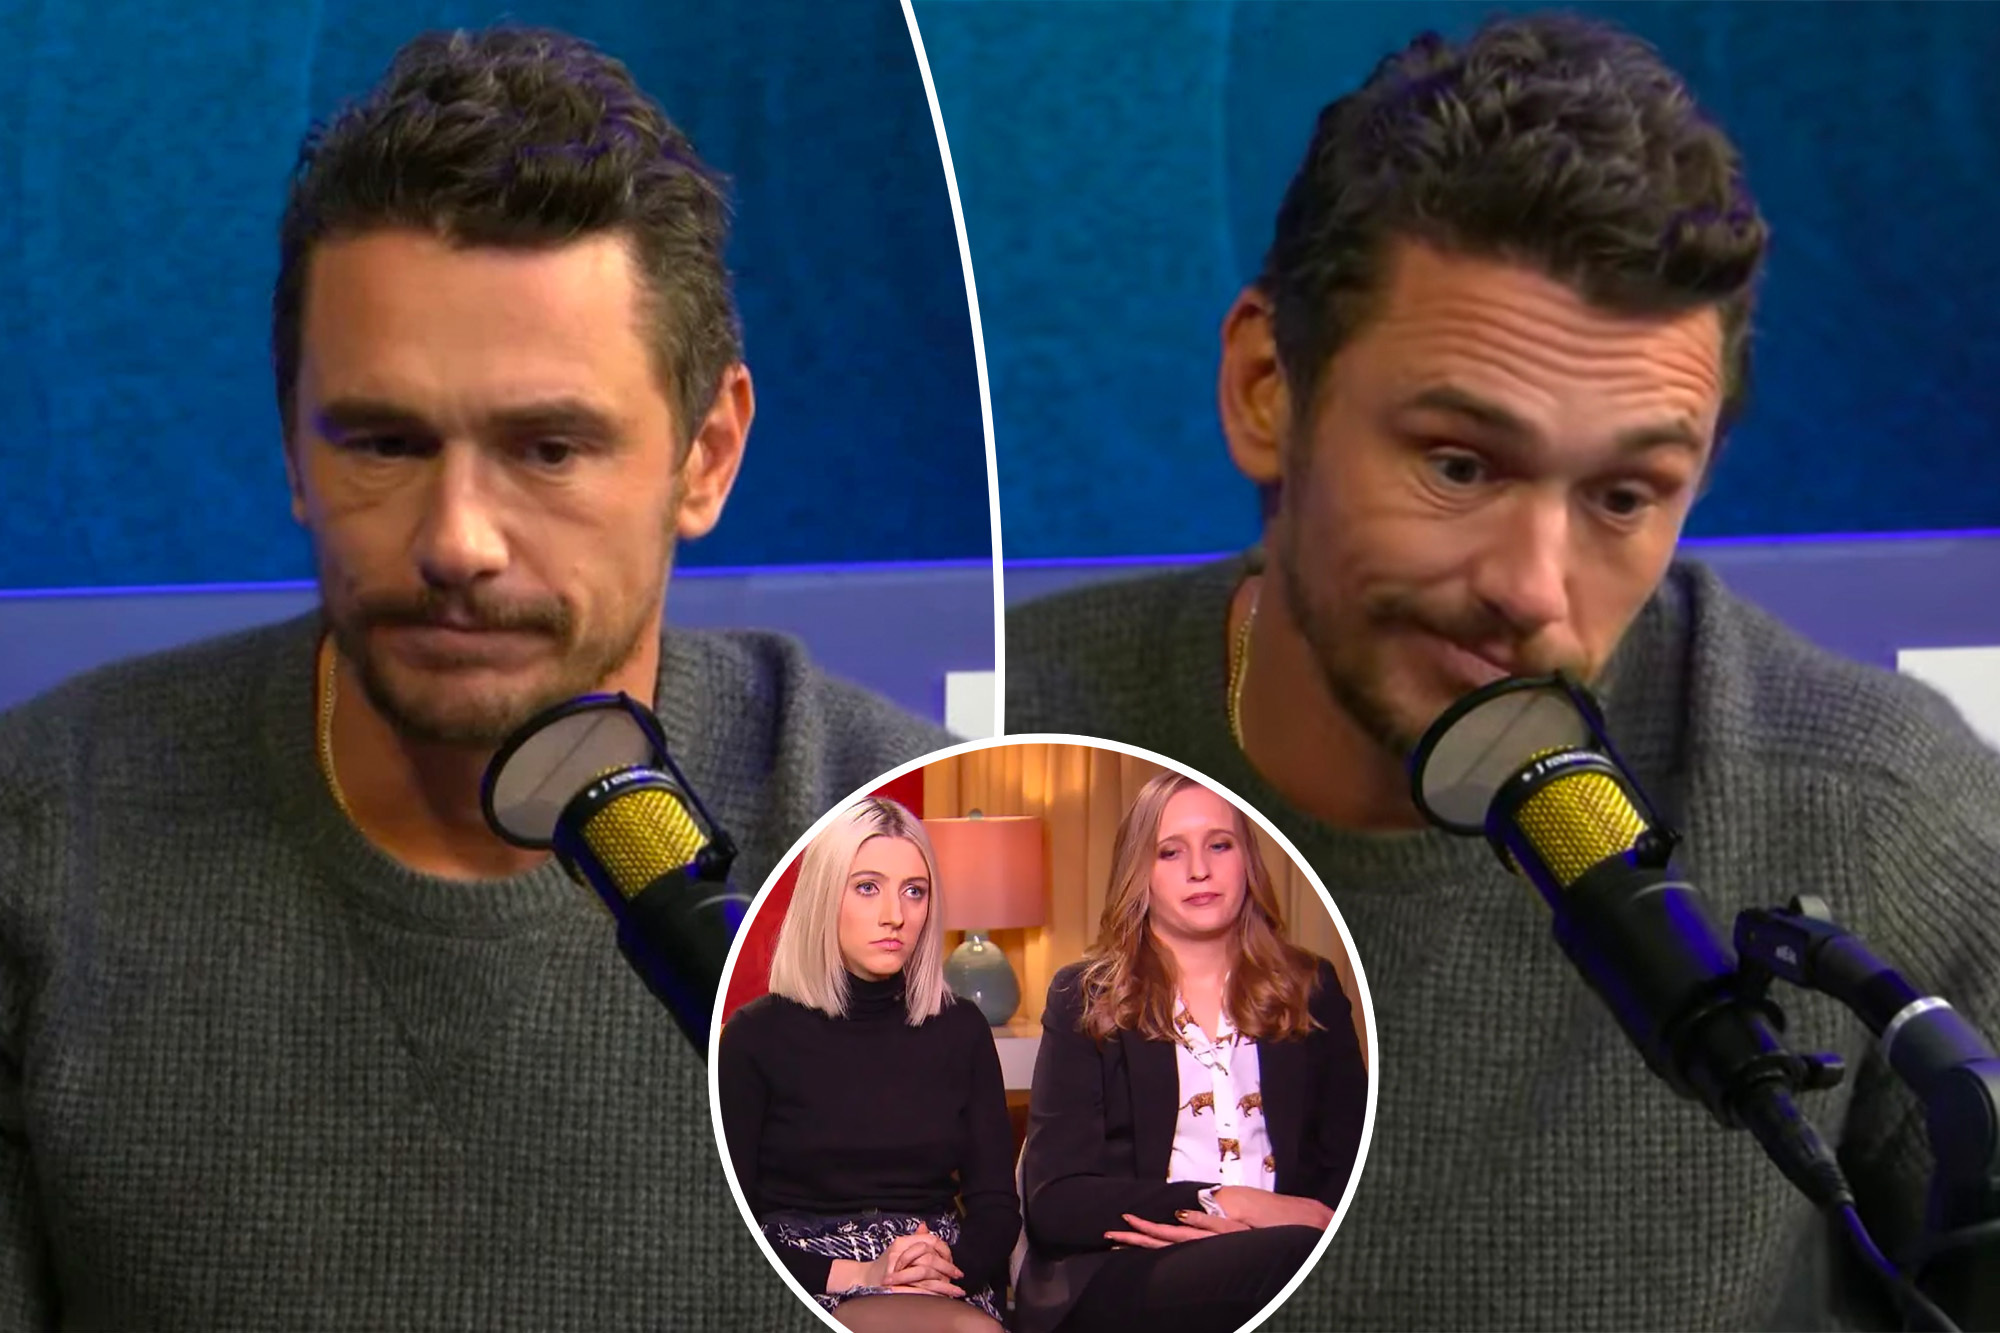 James Franco admits to having sex with his students: ‘That was wrong’